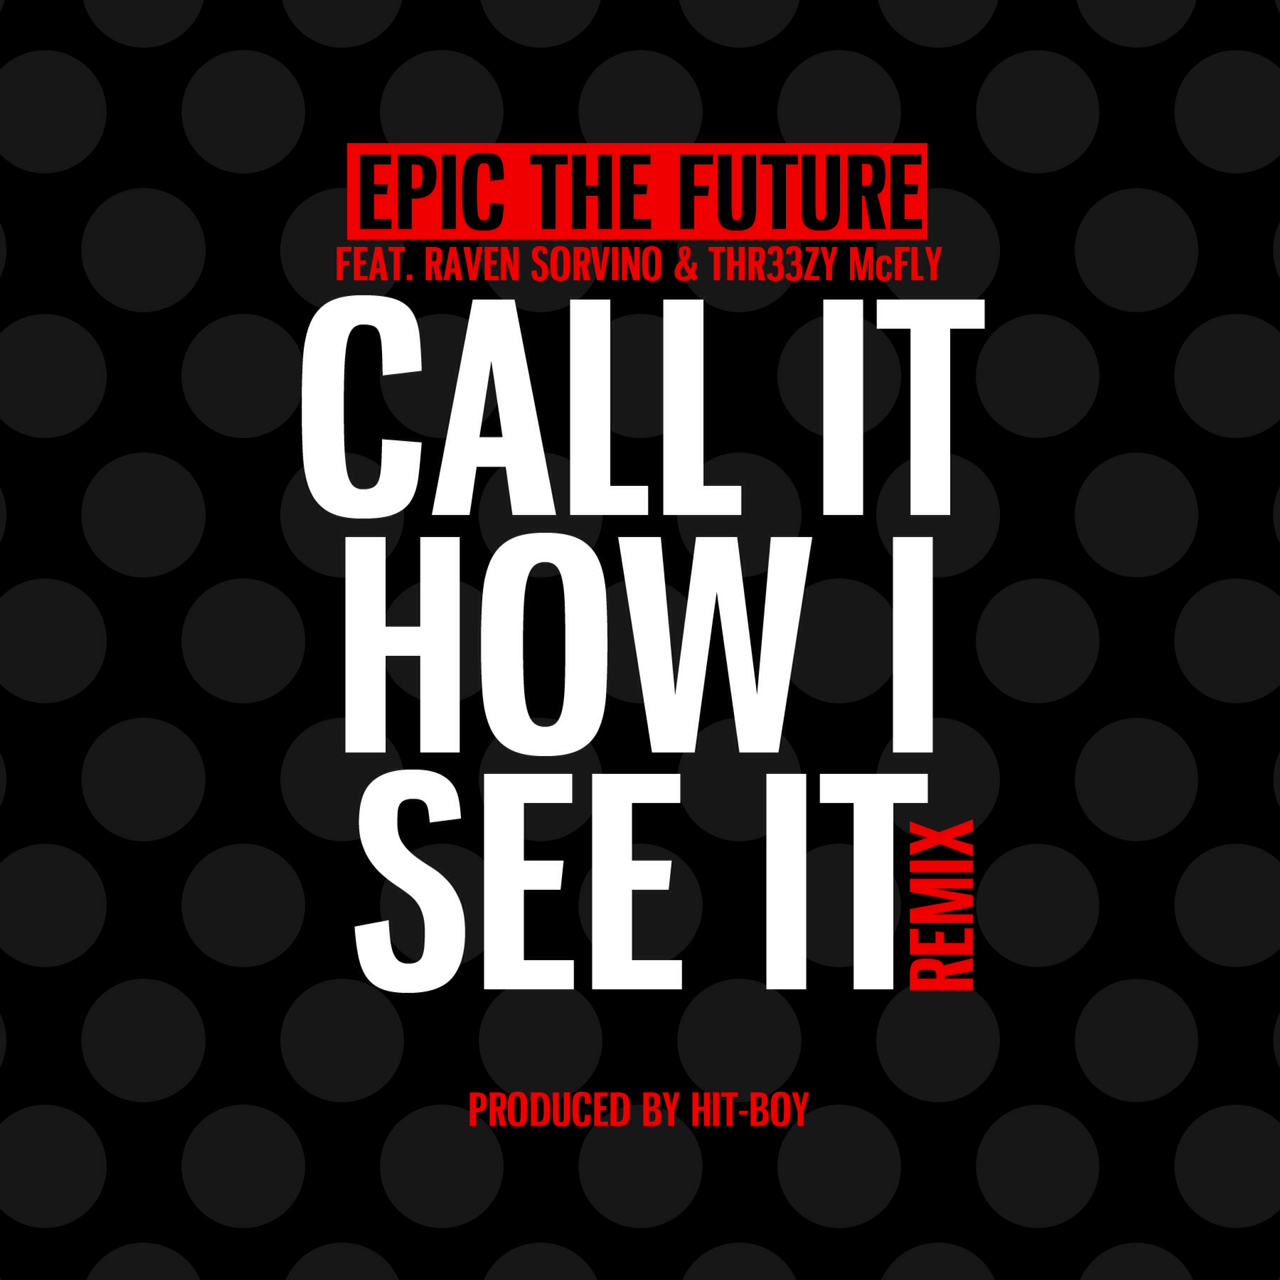 Epic The Future ft. Raven Sorvino & Thr33zy Mcfly – Call It How I See It (Remix) (Prod. by Hit-Boy) (Audio)